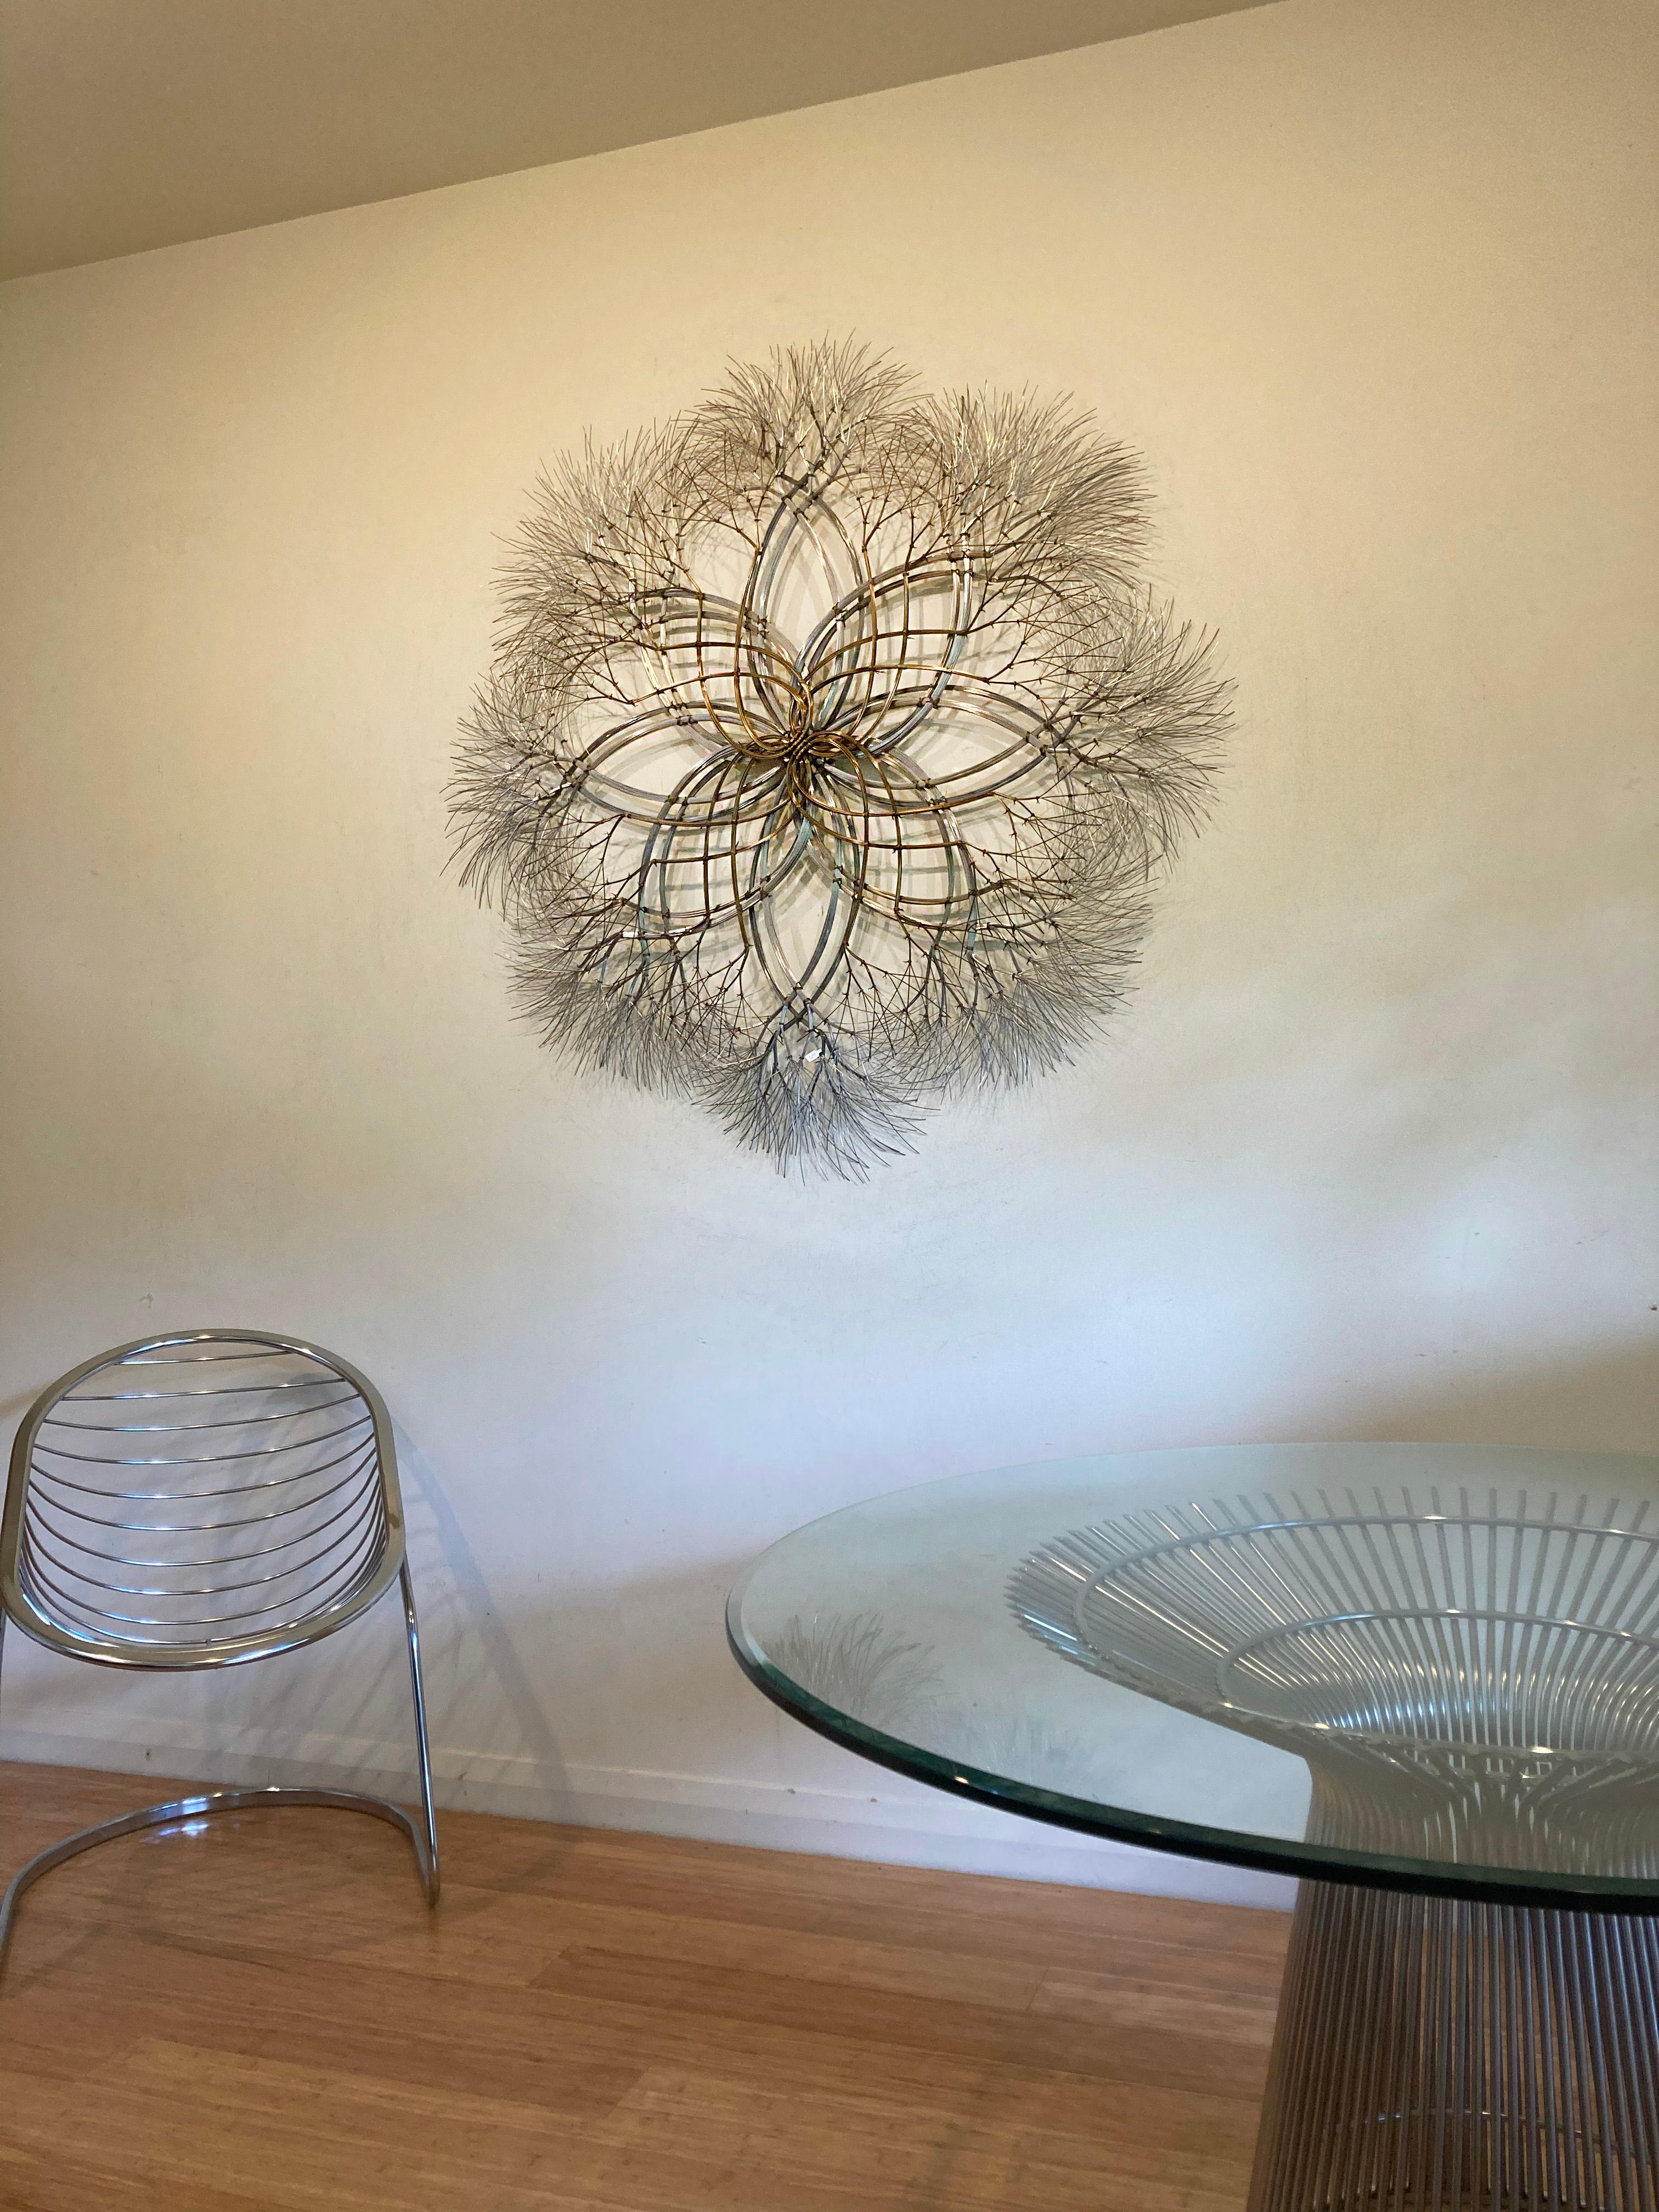 Aged brass, stainless steel. 

Kue King created this wall mounted sculpture using brass and stainless steel wire. The brass is aged to give the sculpture a warmth and depth in color and display. The polished stainless steel gives the sculpture a